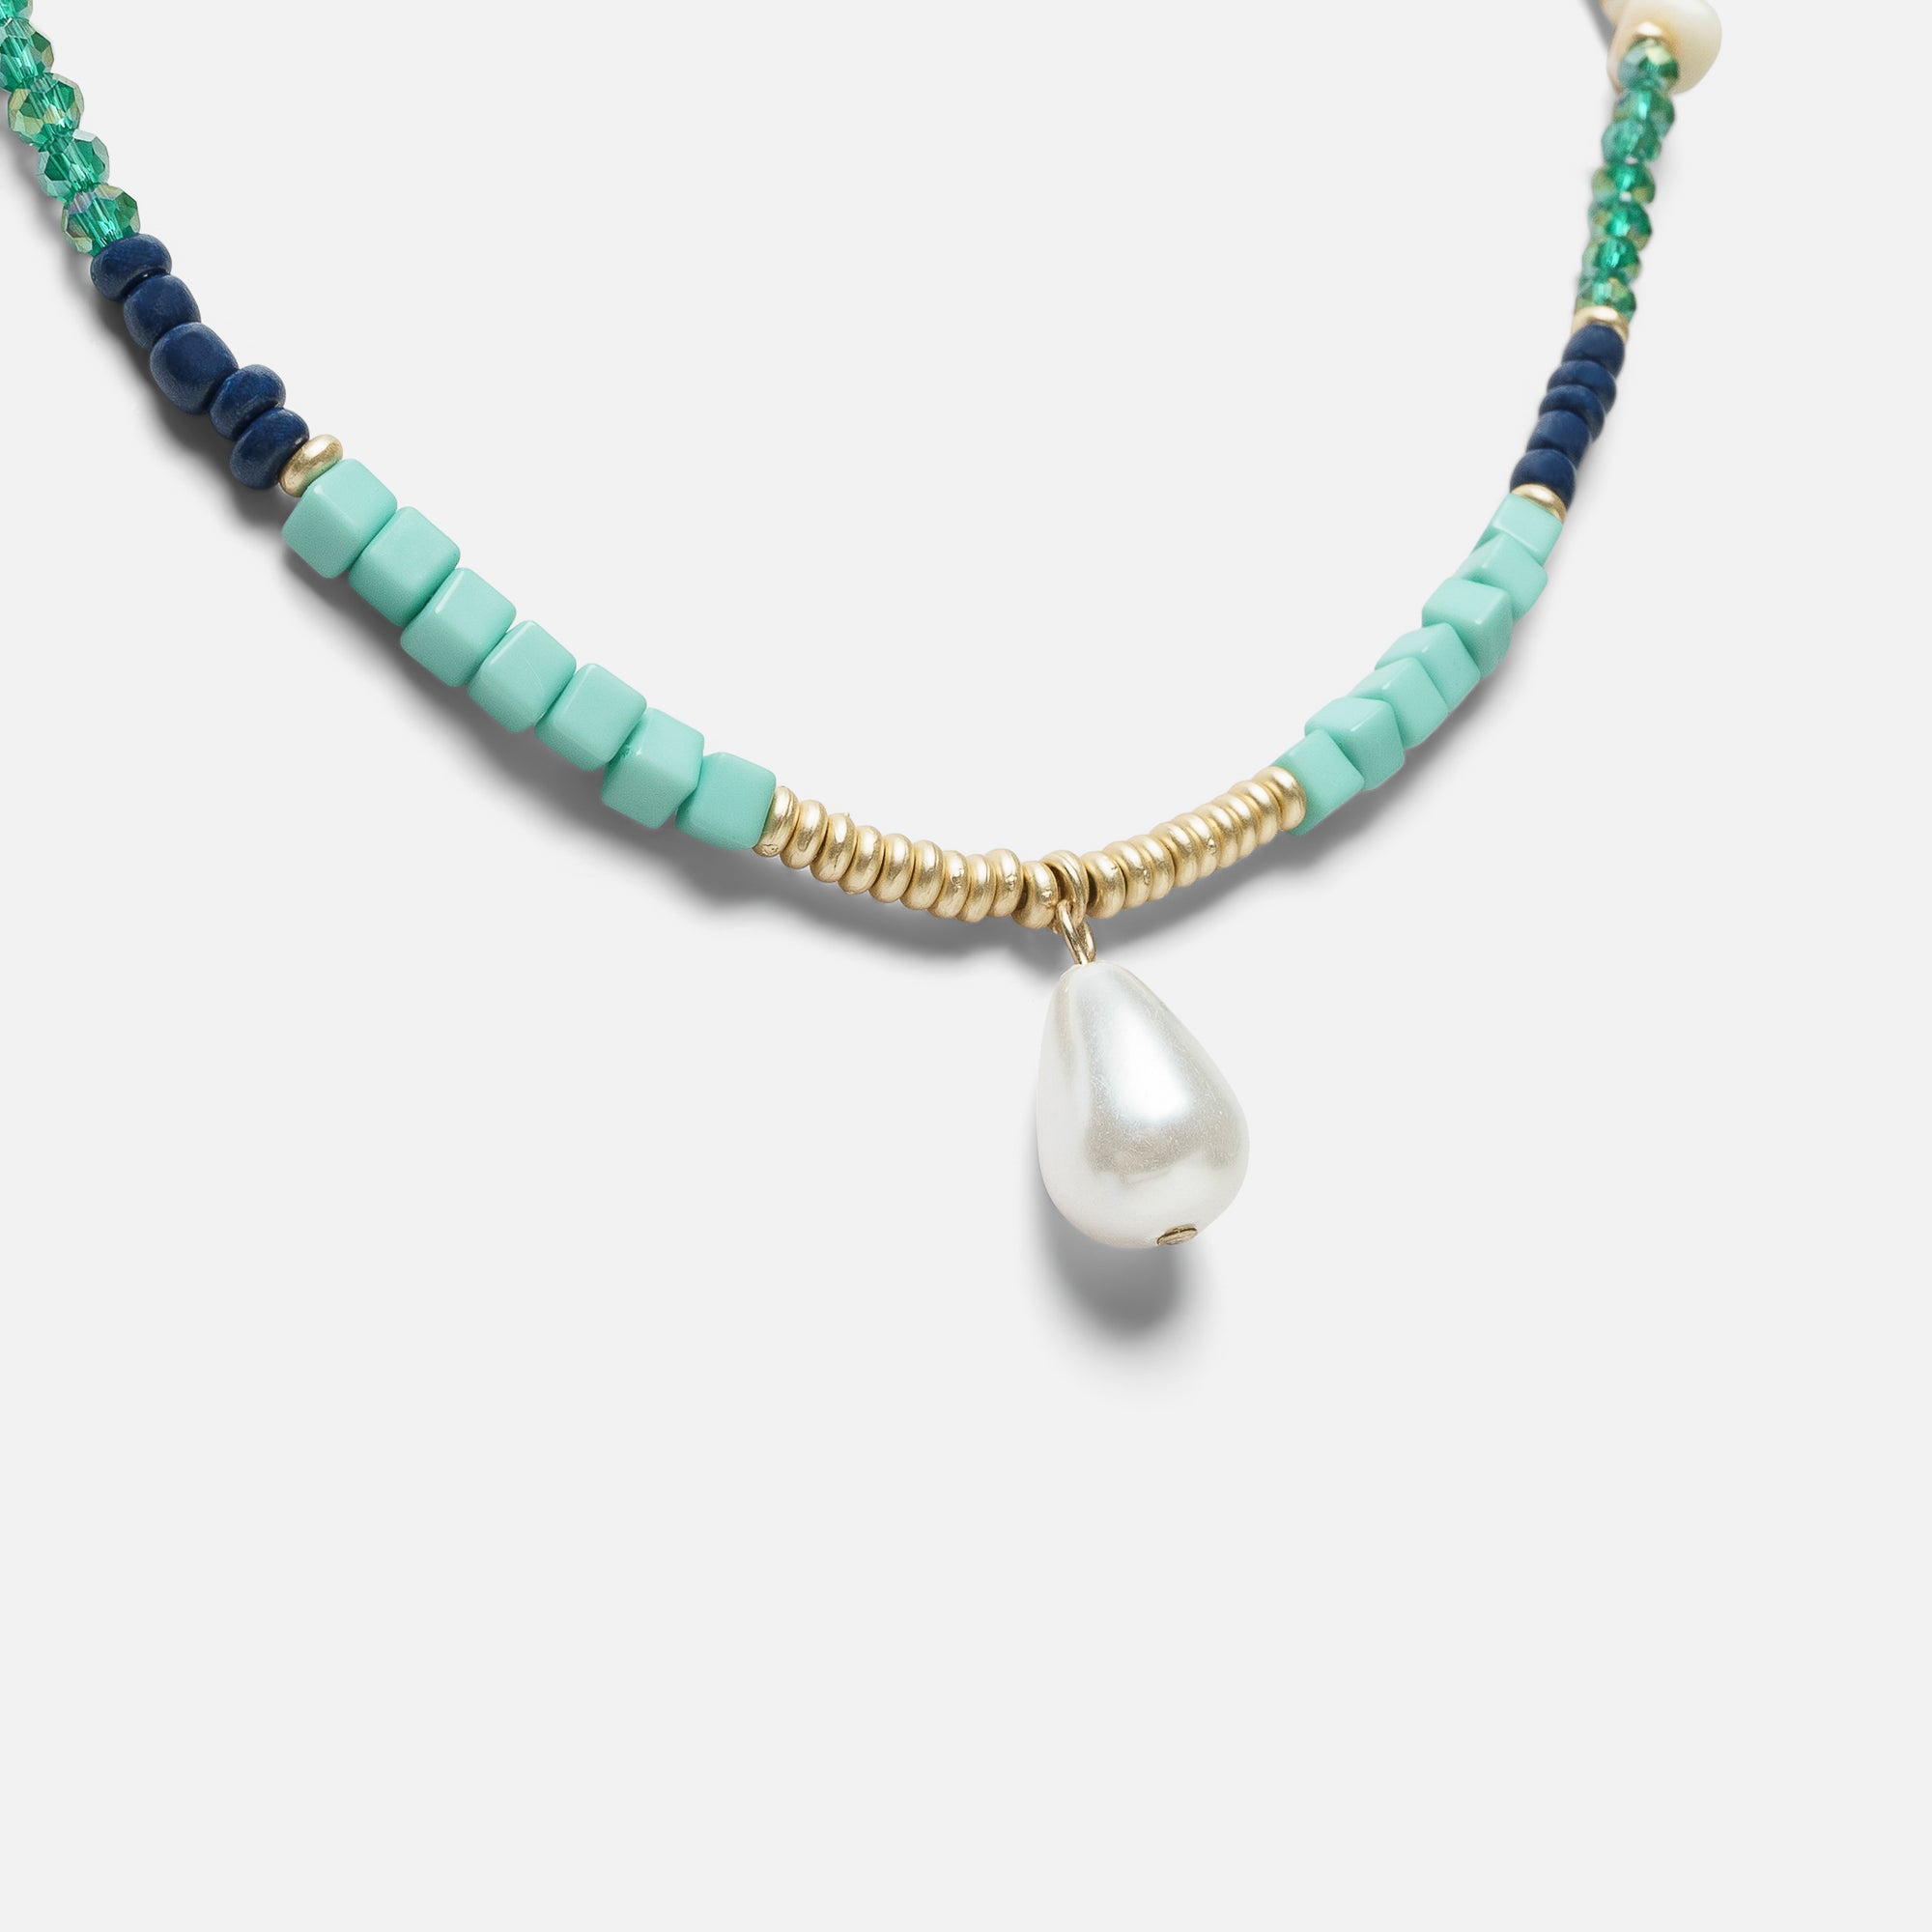 Short necklace with green and blue beads and pearl charm